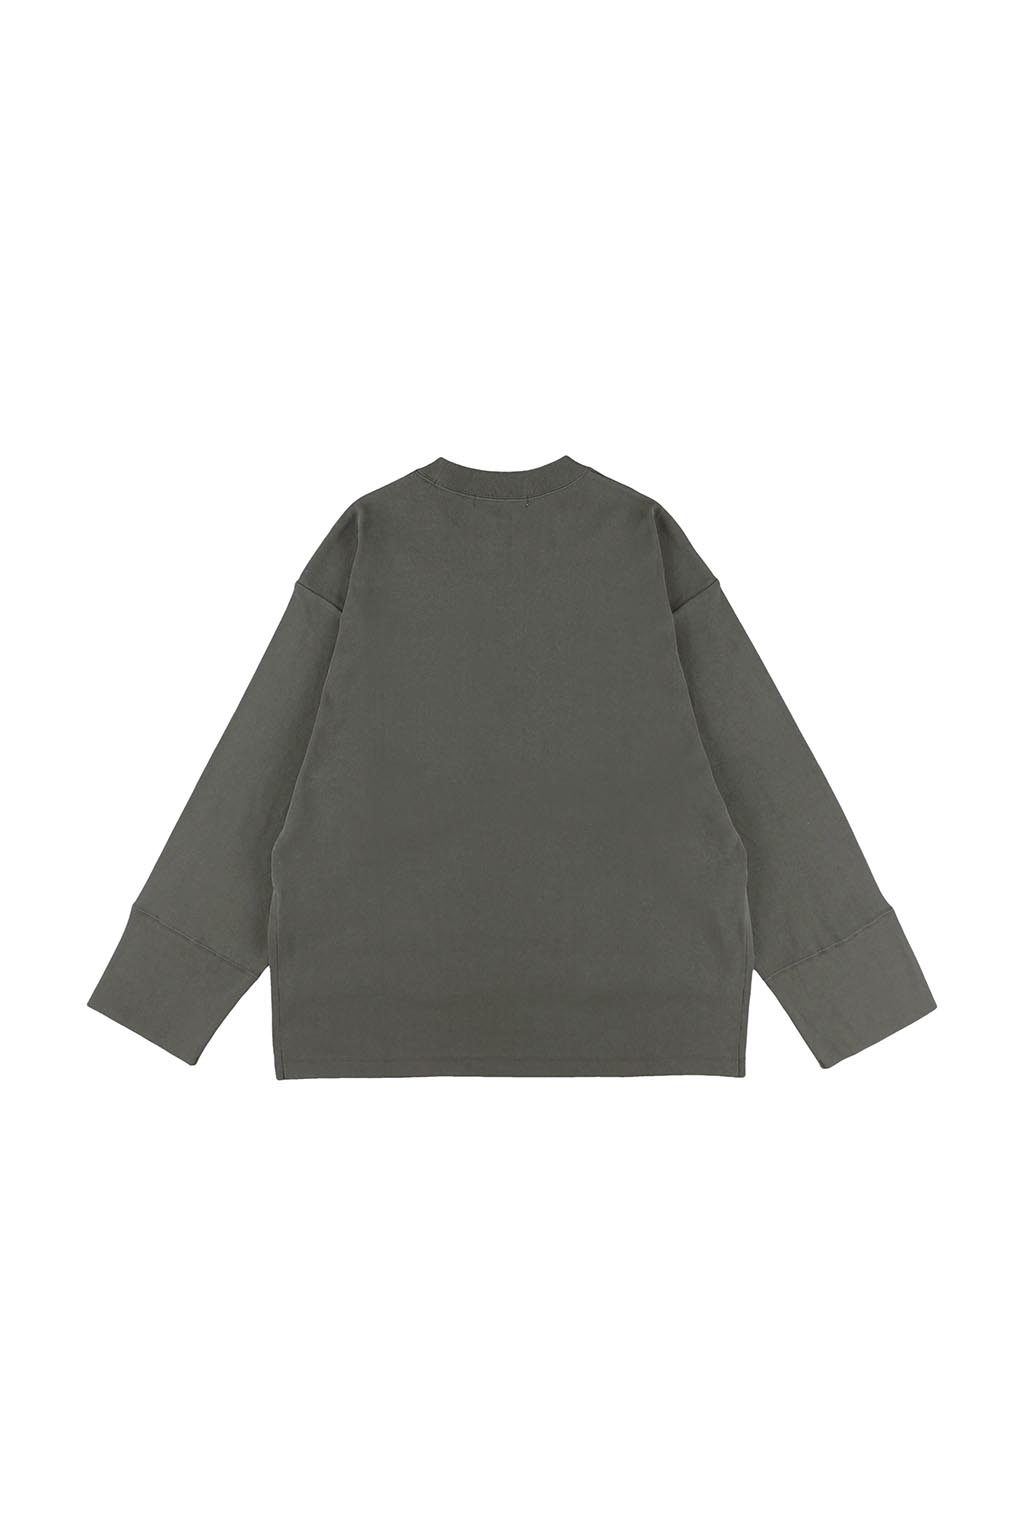 Oversized Front Pocket Long Sleeve Top - ALEXIA STAM